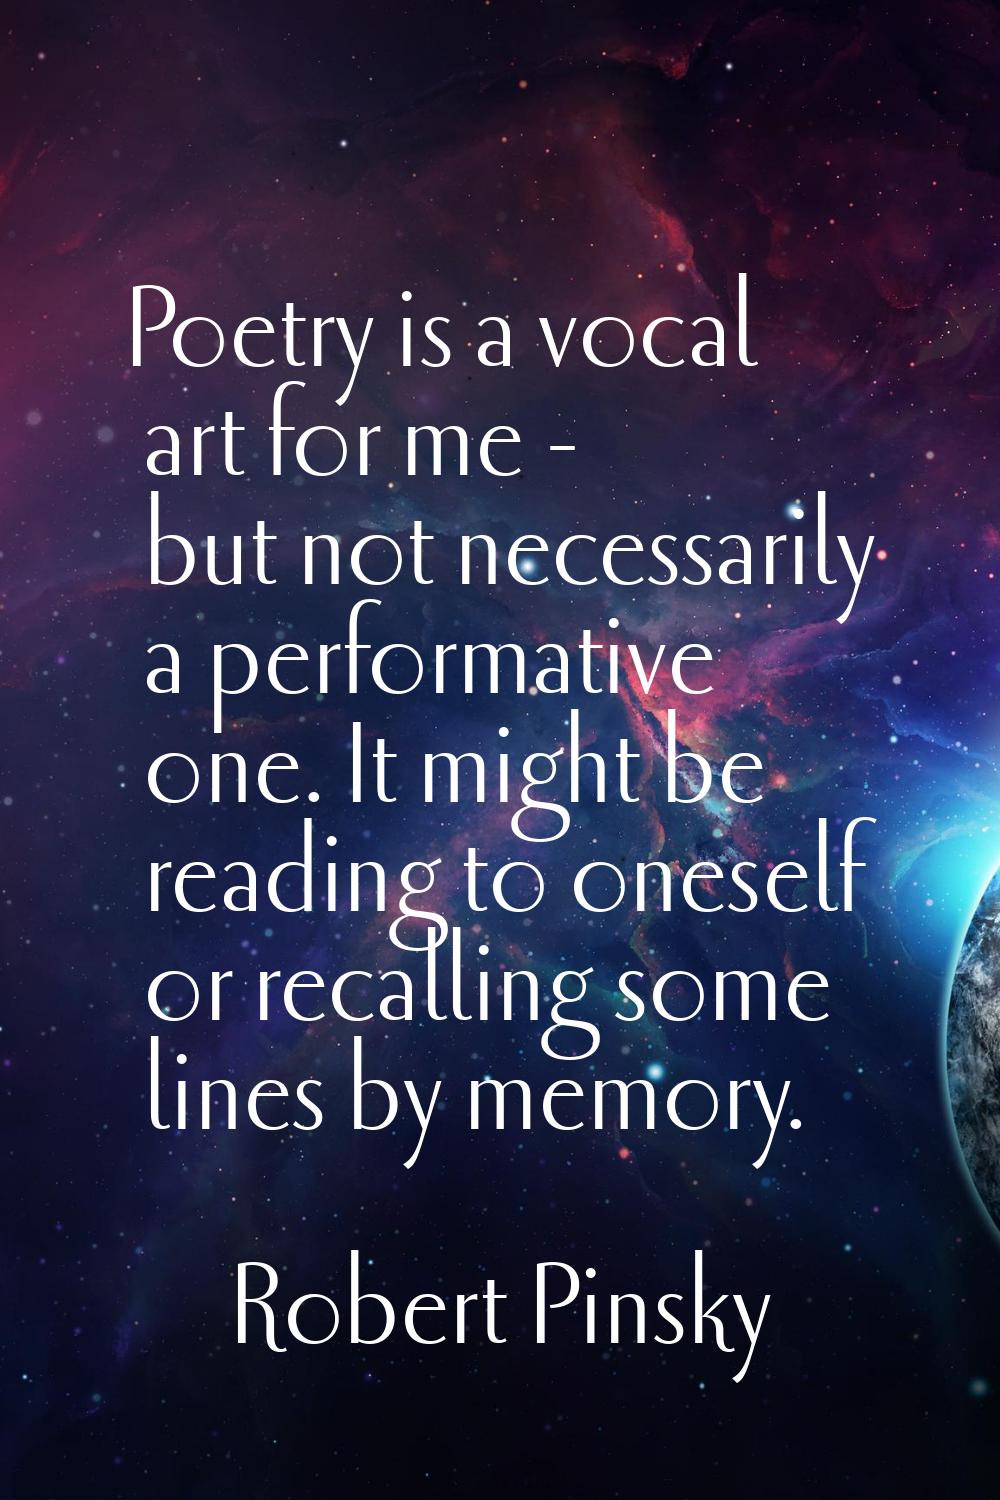 Poetry is a vocal art for me - but not necessarily a performative one. It might be reading to onese